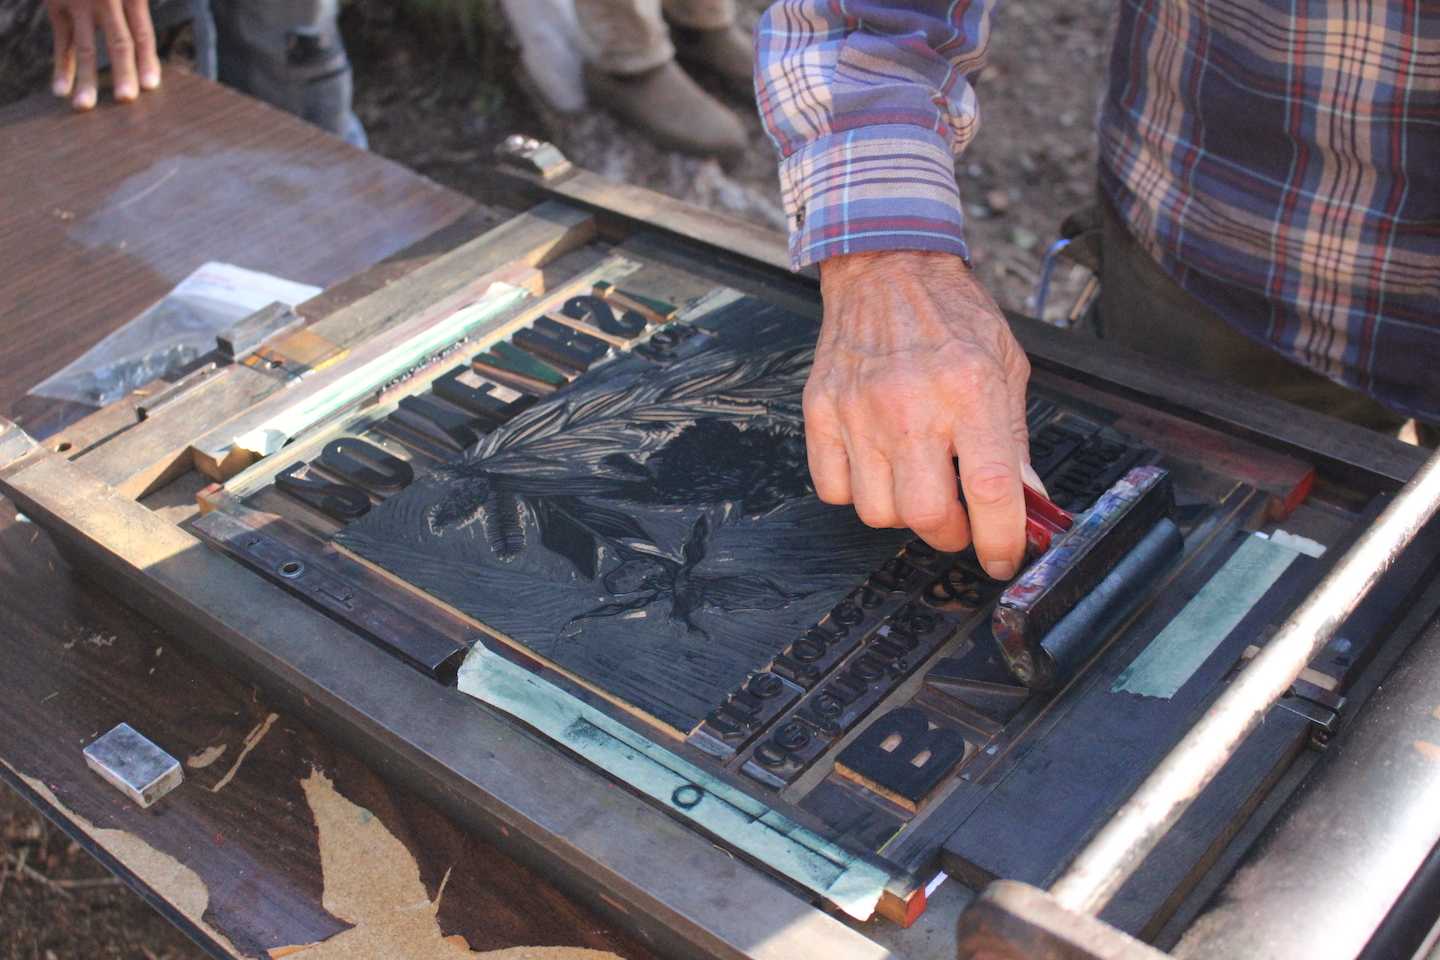 A person's hand is holding an inking roller and is running it across a plate on an old fashioned letterpress.